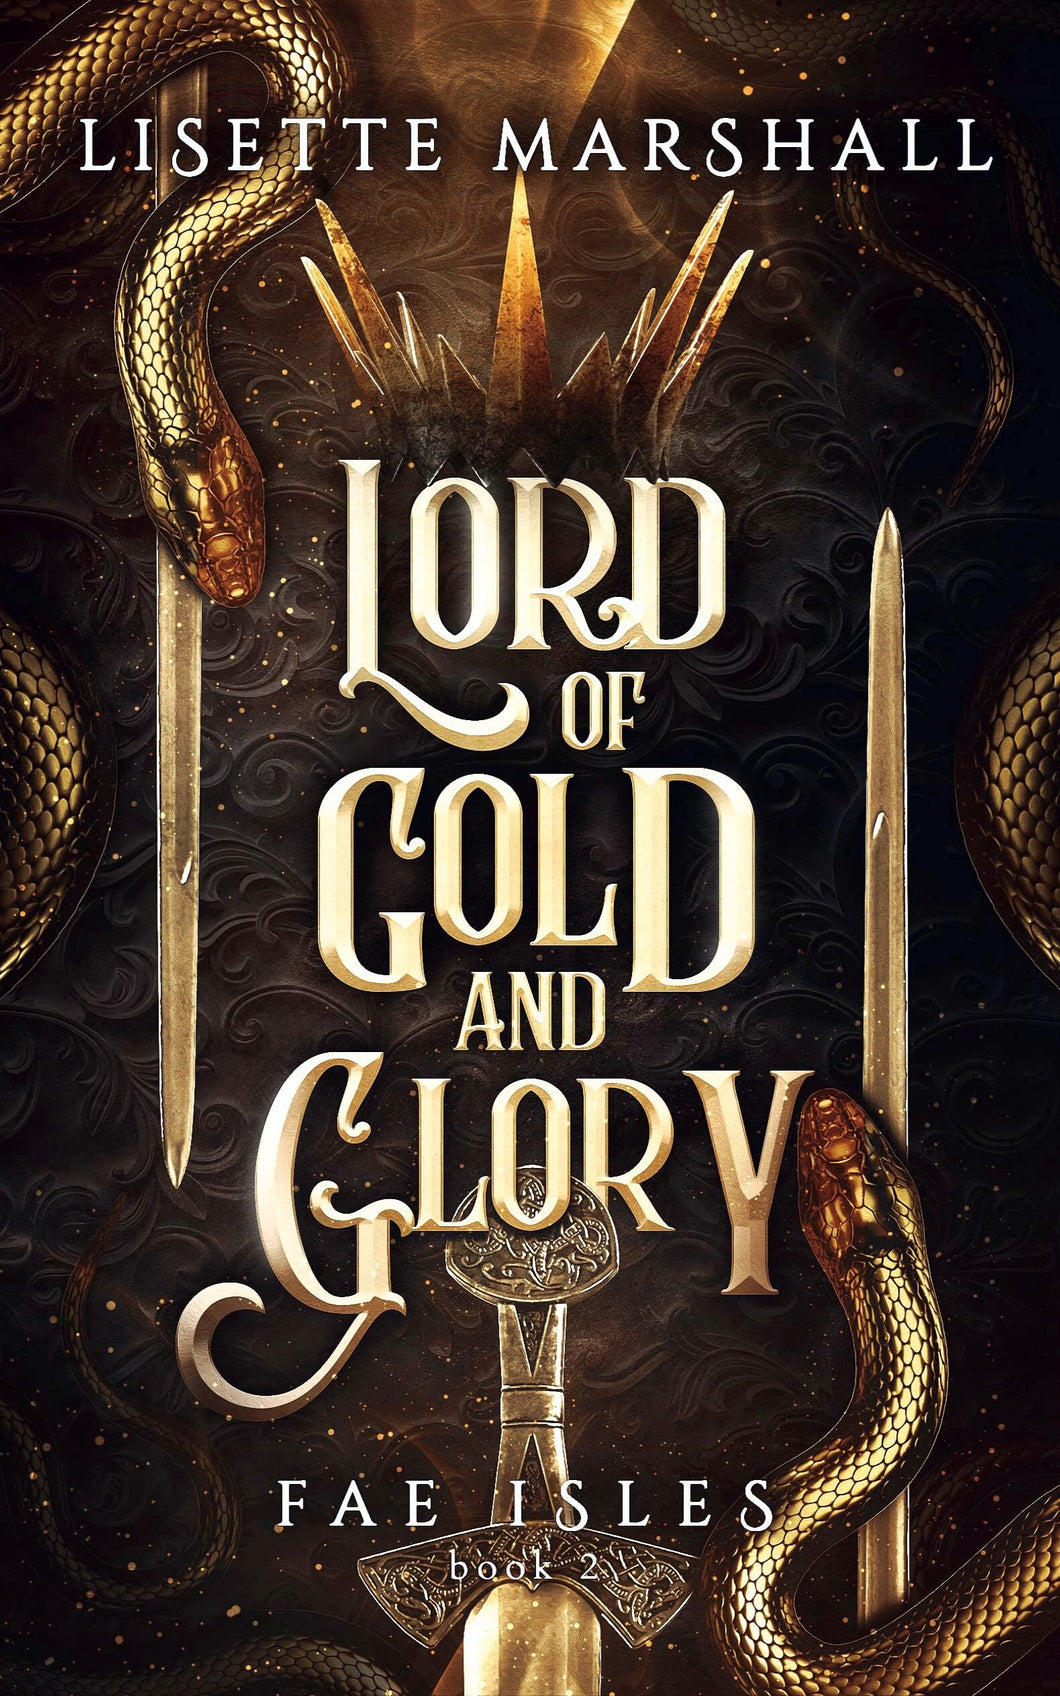 Lord of Gold and Glory (Fae Isles #2) - Lisette Marshall